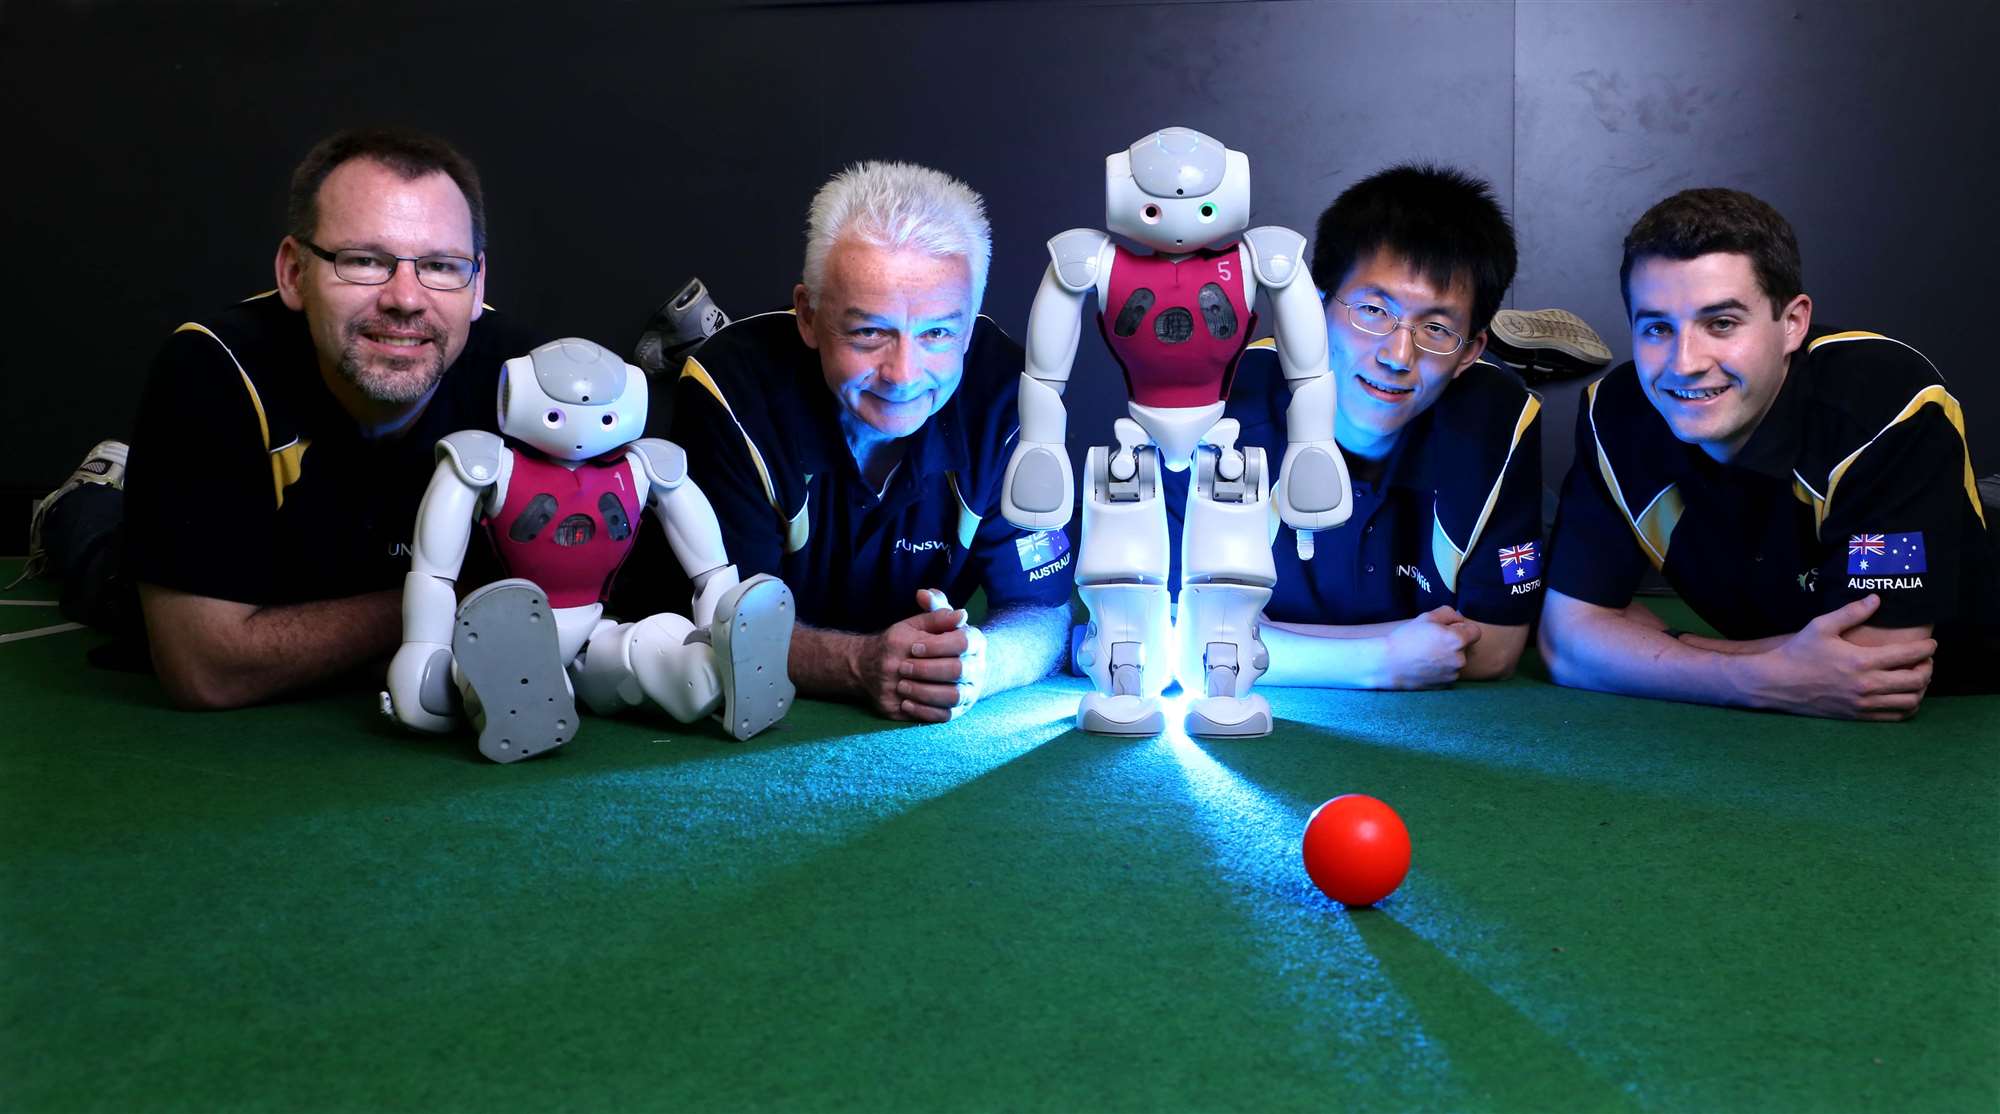 Australia wins right to host RoboCup 2019